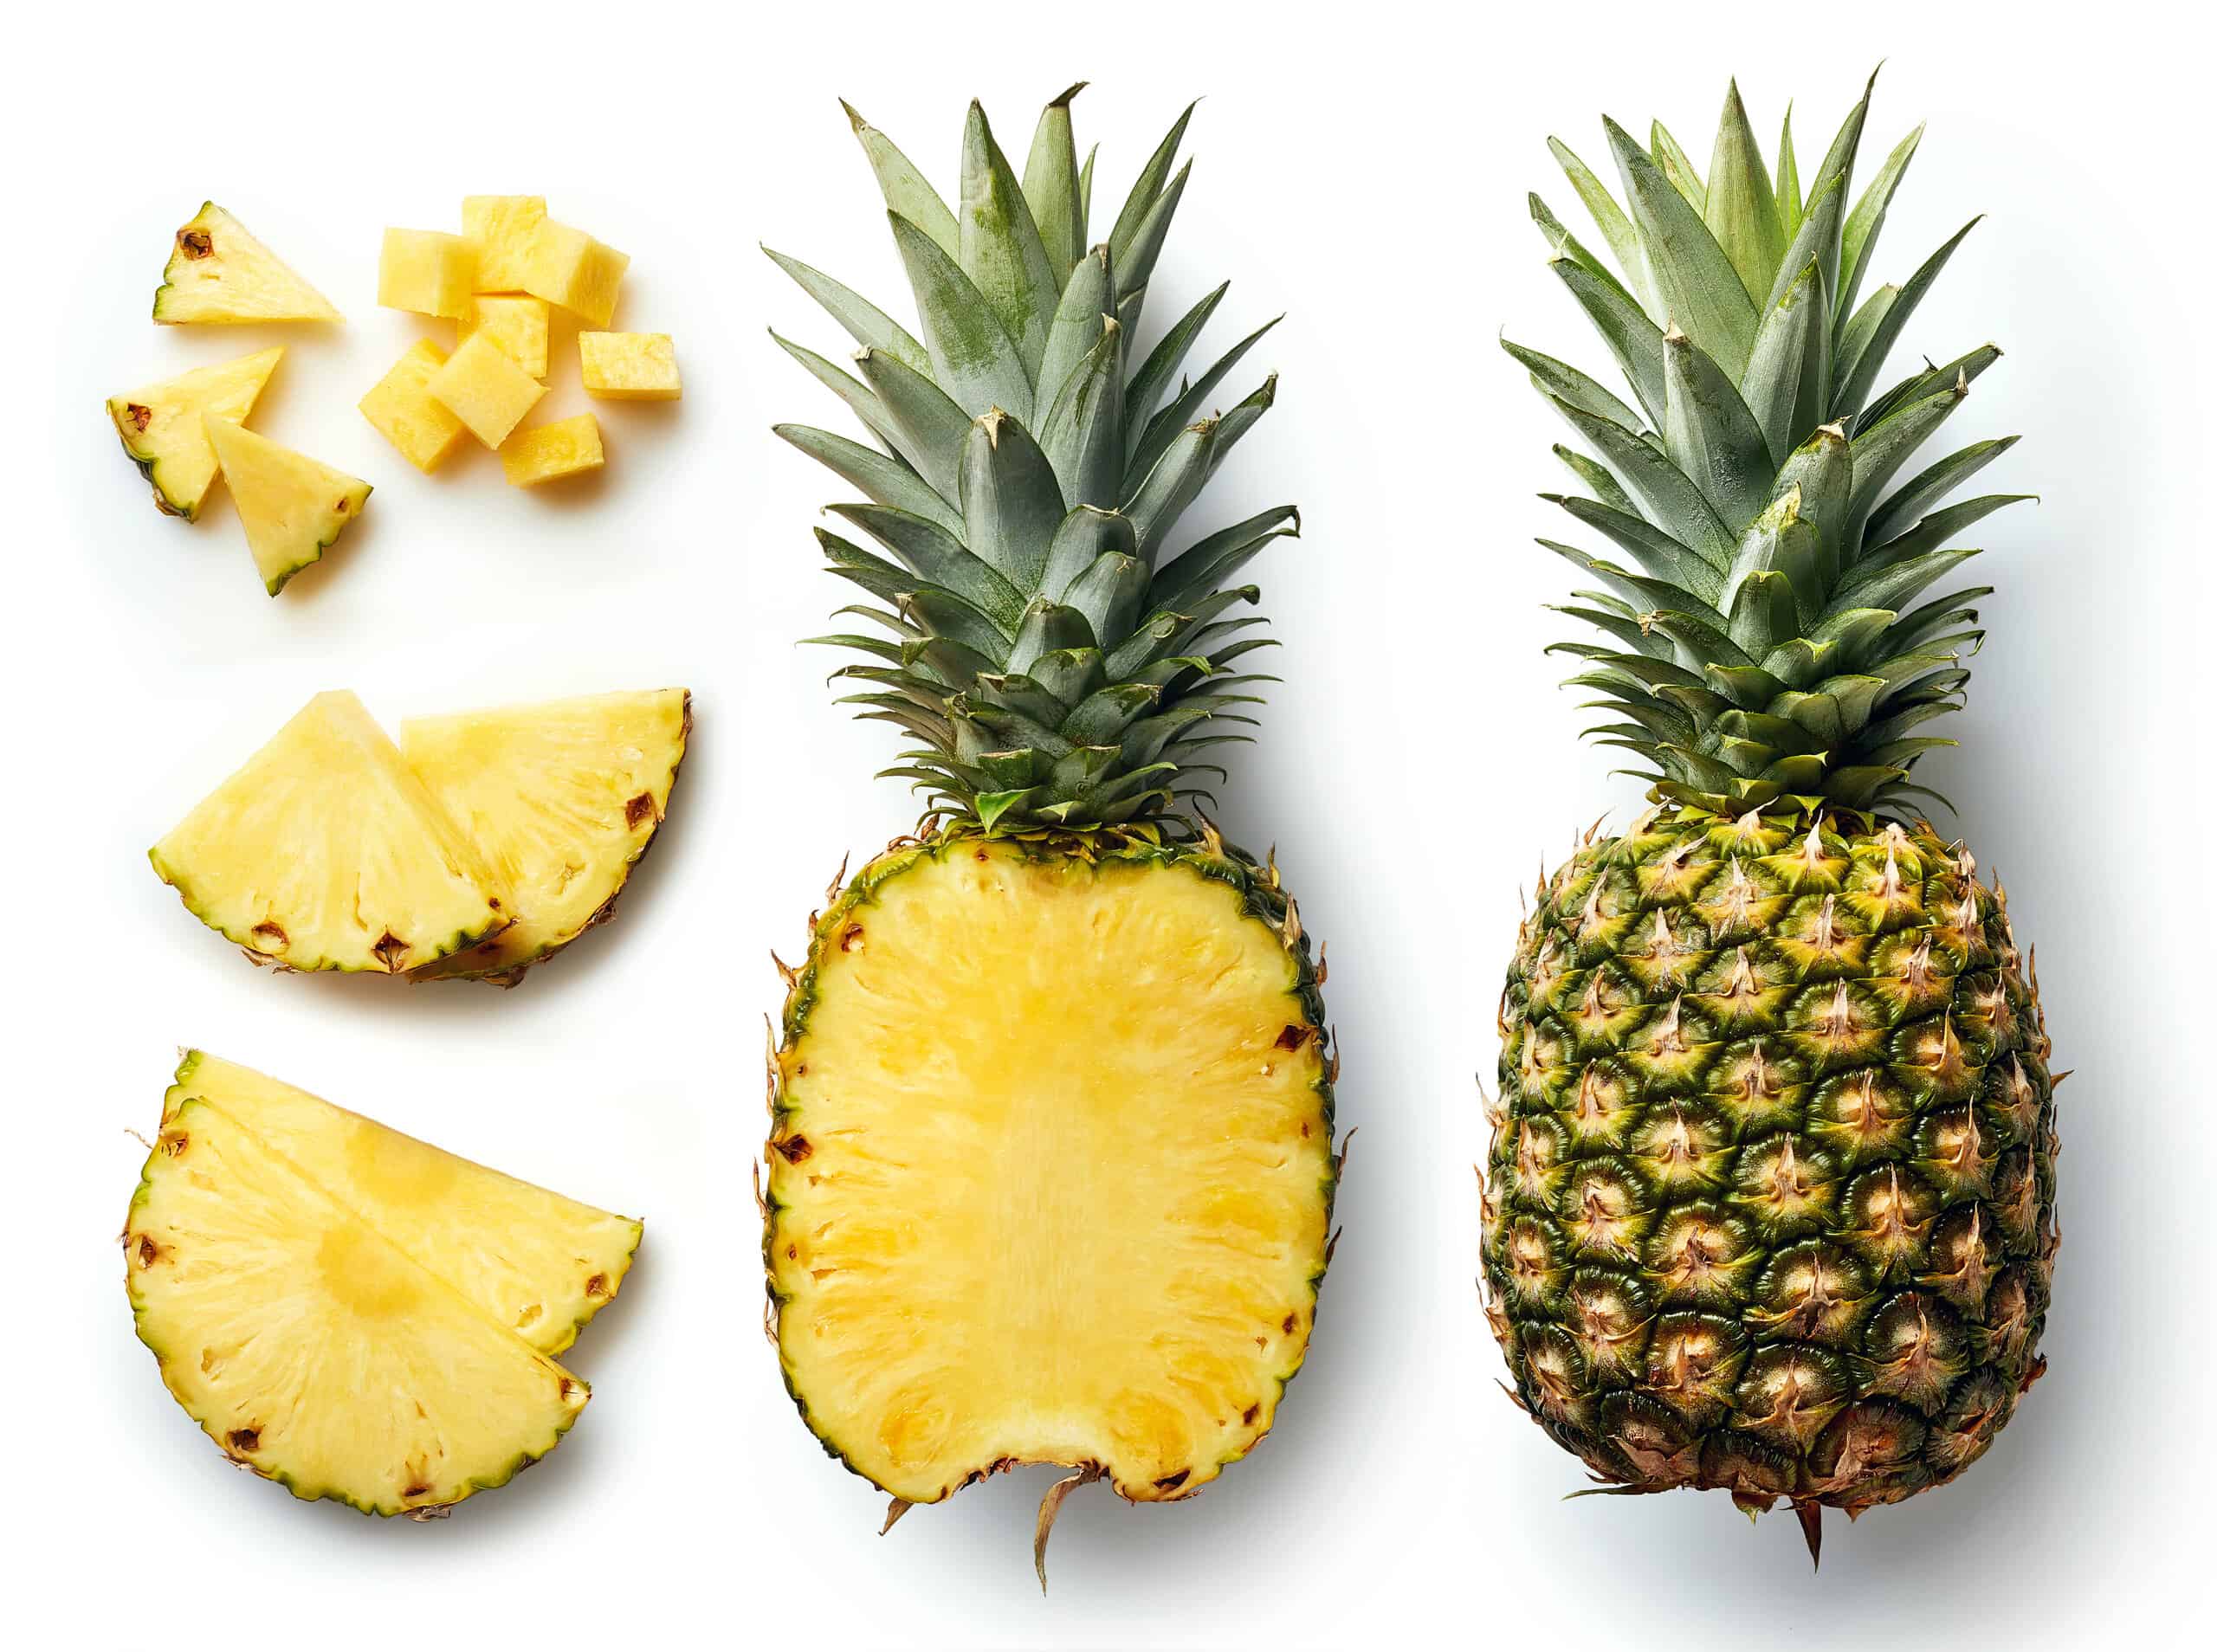 What Are Pineapples?